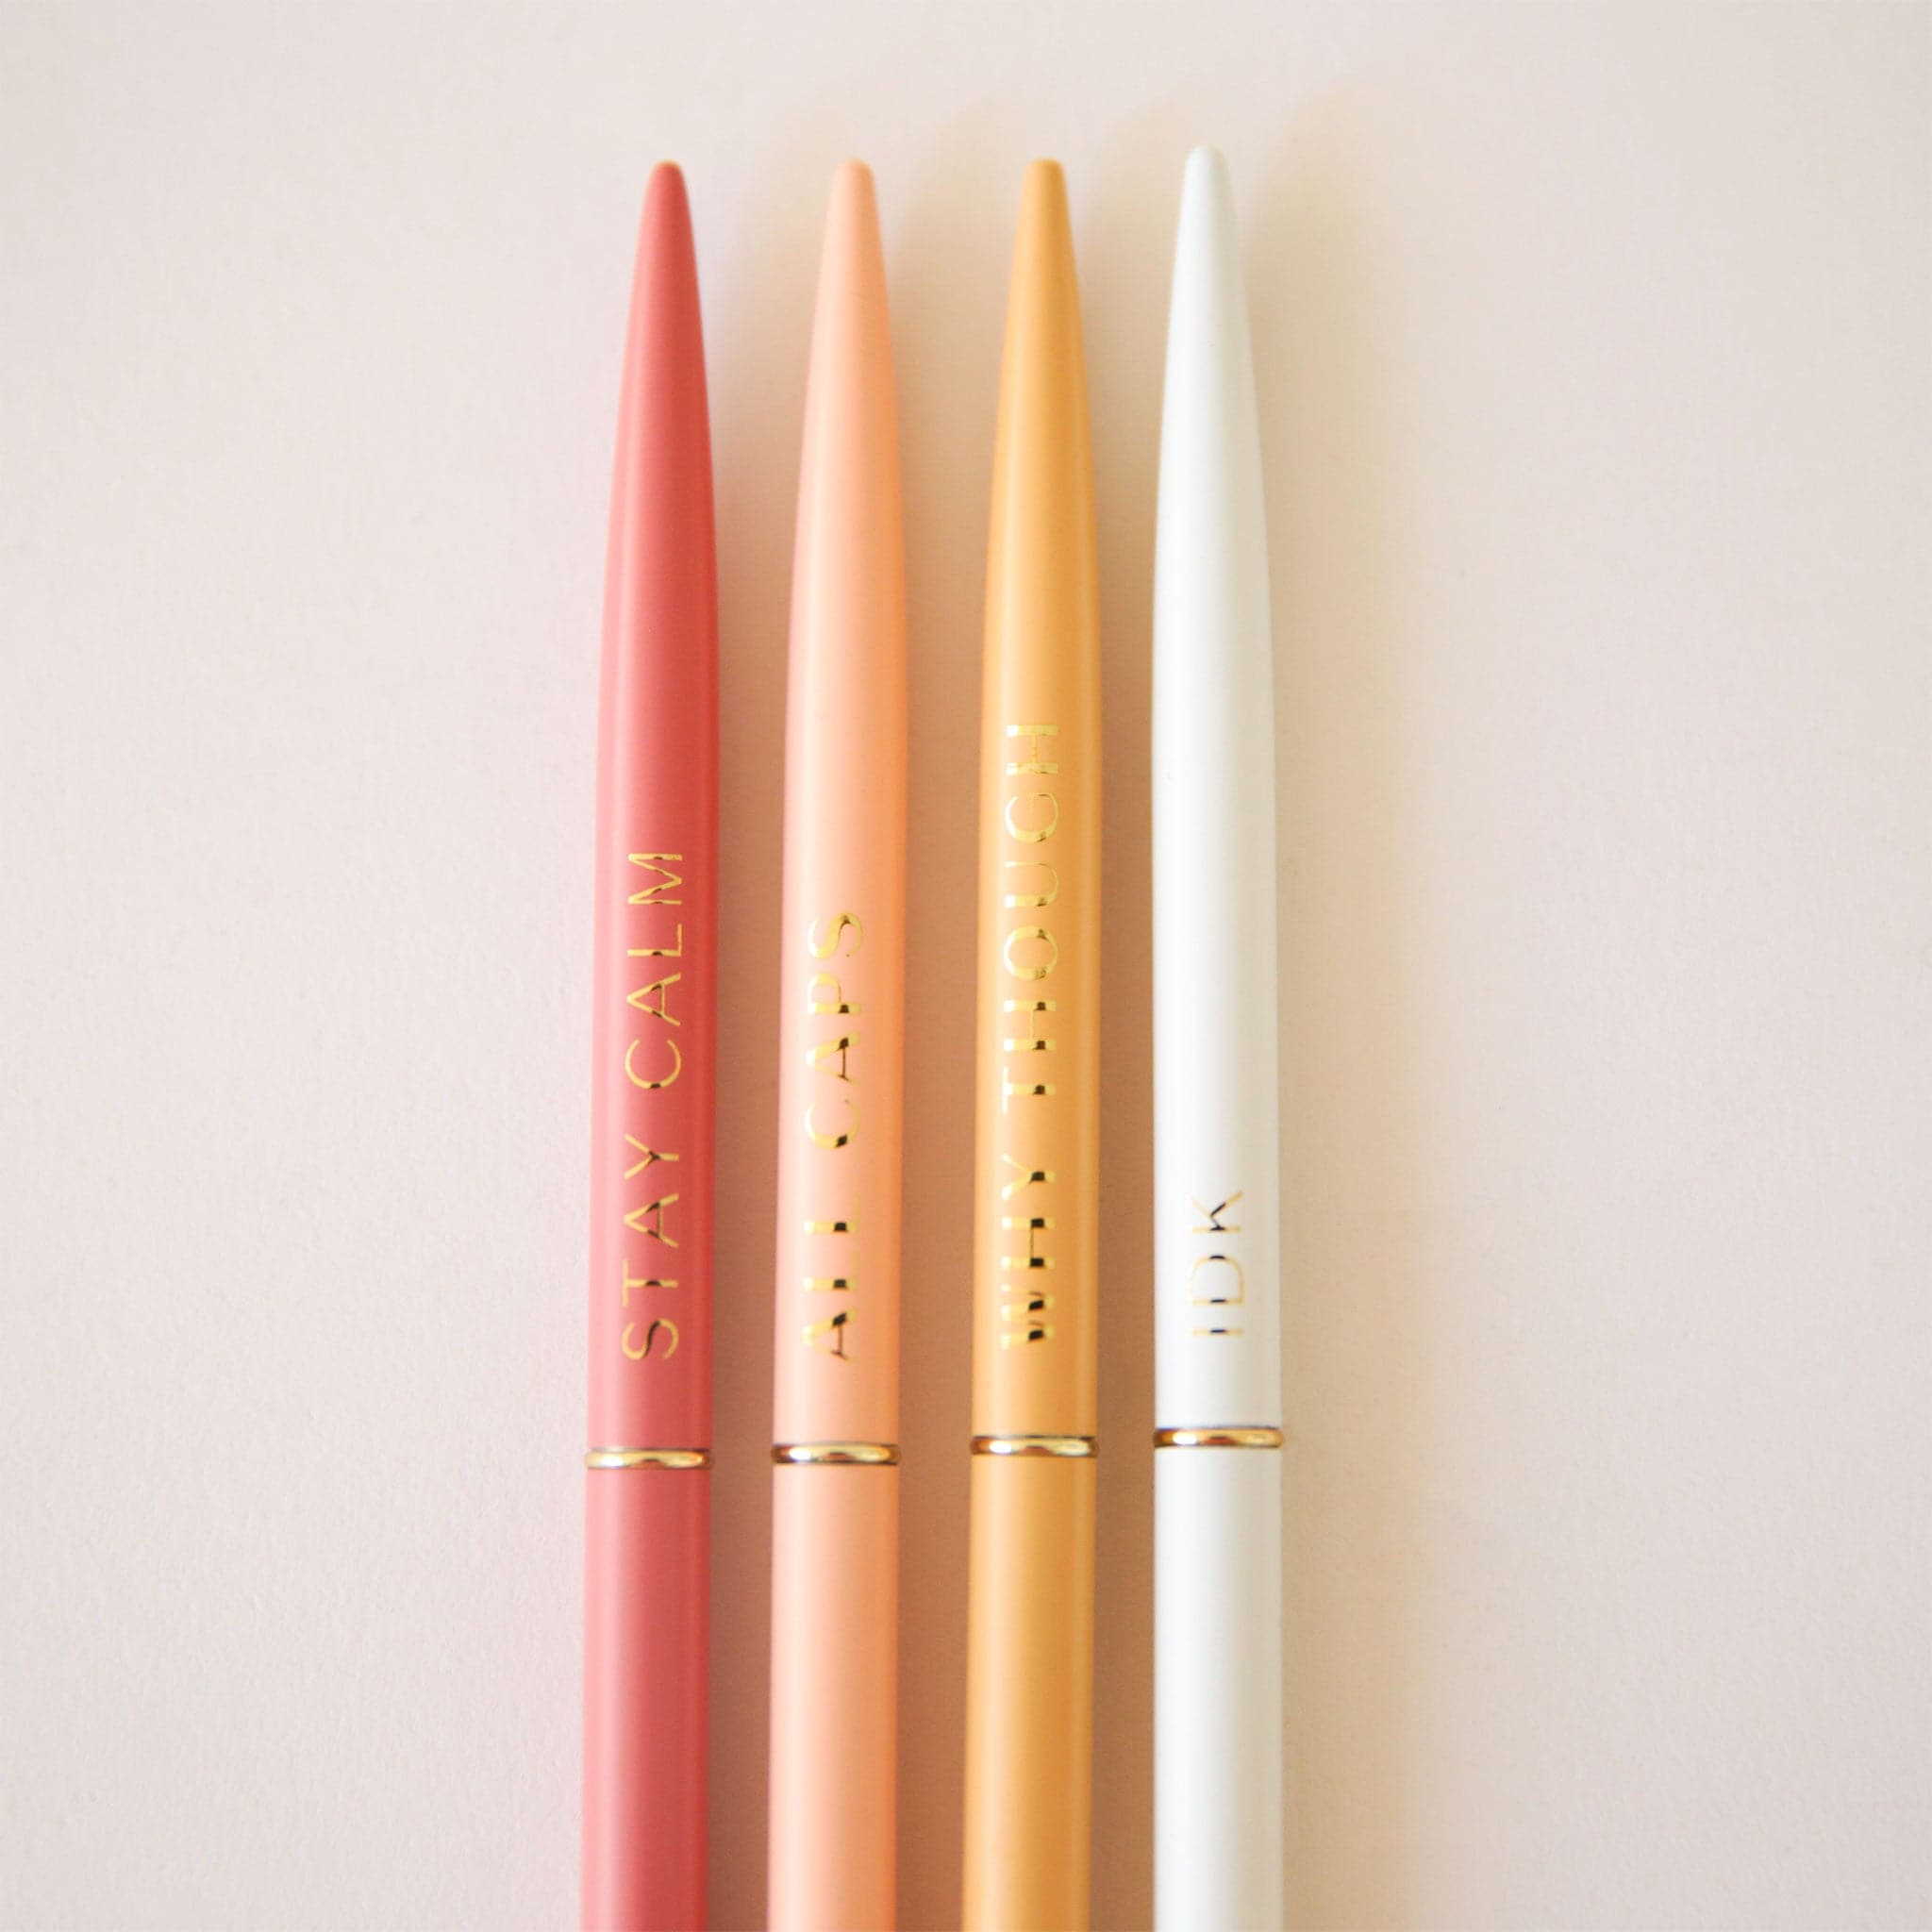 A set of 4 slender pens in yellow, white, salmon and rust. Each pen says something different. The rust pen says, "Stay Calm". The salmon pen says, "All Caps". The white pens says, "Idk". And the yellow pen says, "Why Though".